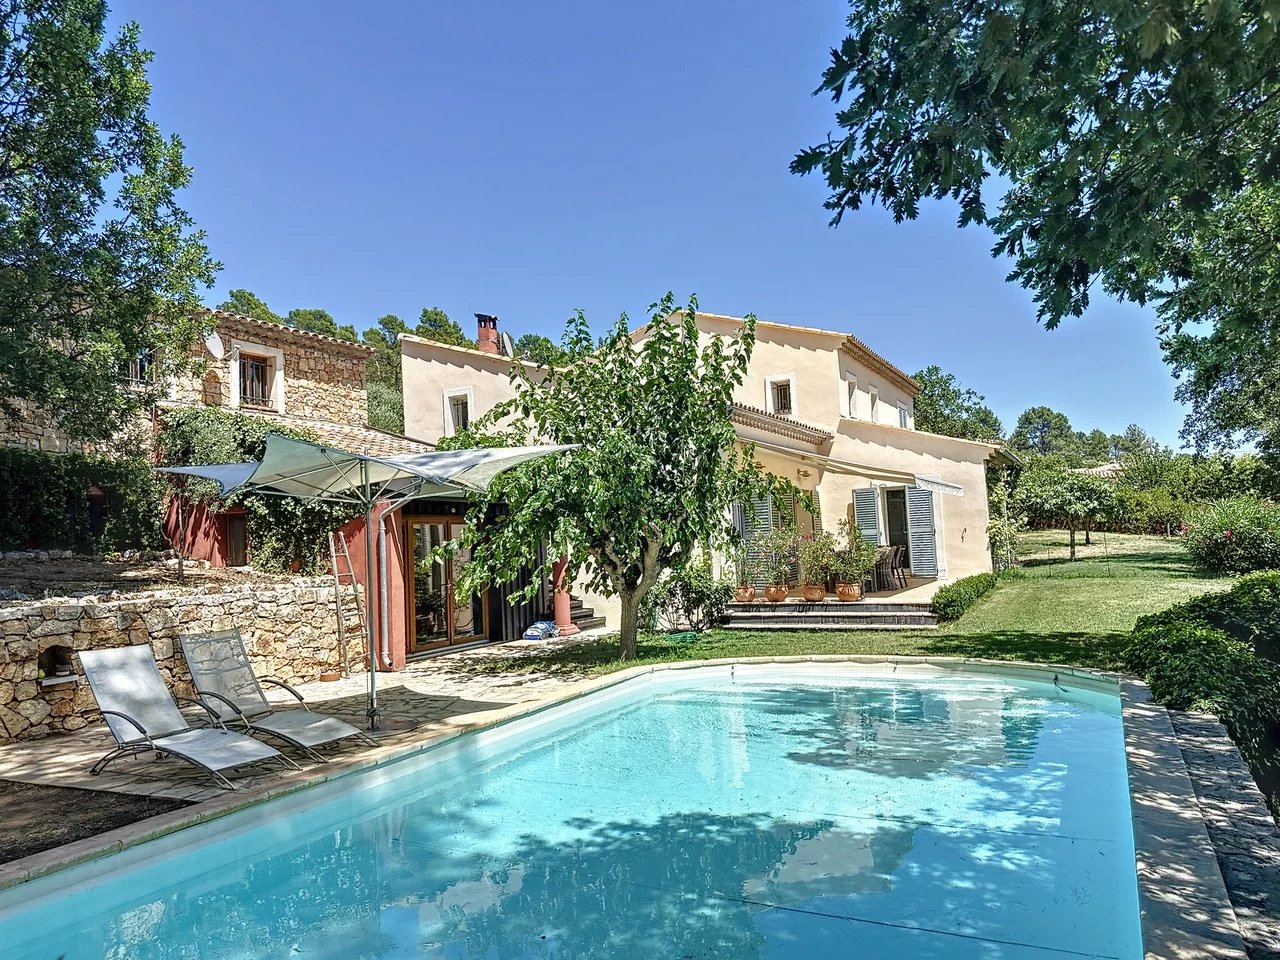 Beautiful villa with panoramic views, guest house and pool